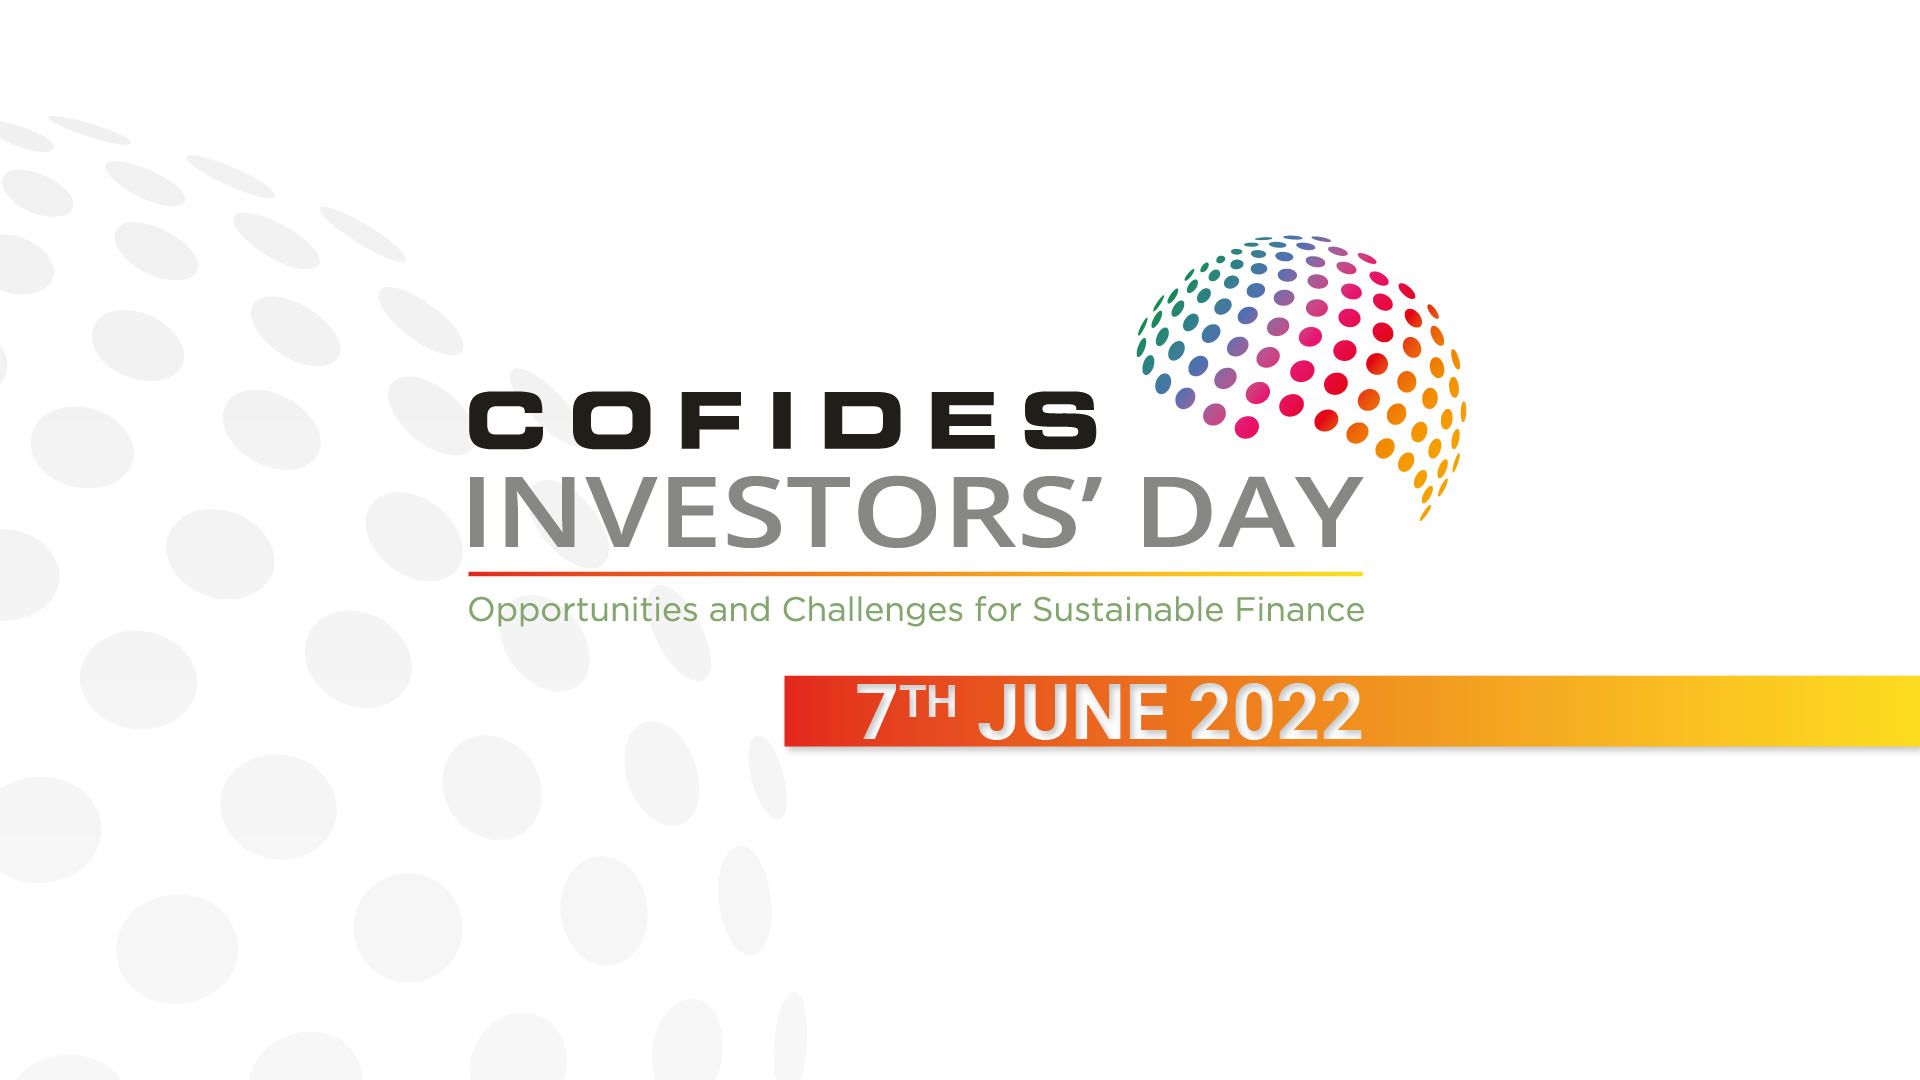 Image of the 'COFIDES Investors Day' event banner